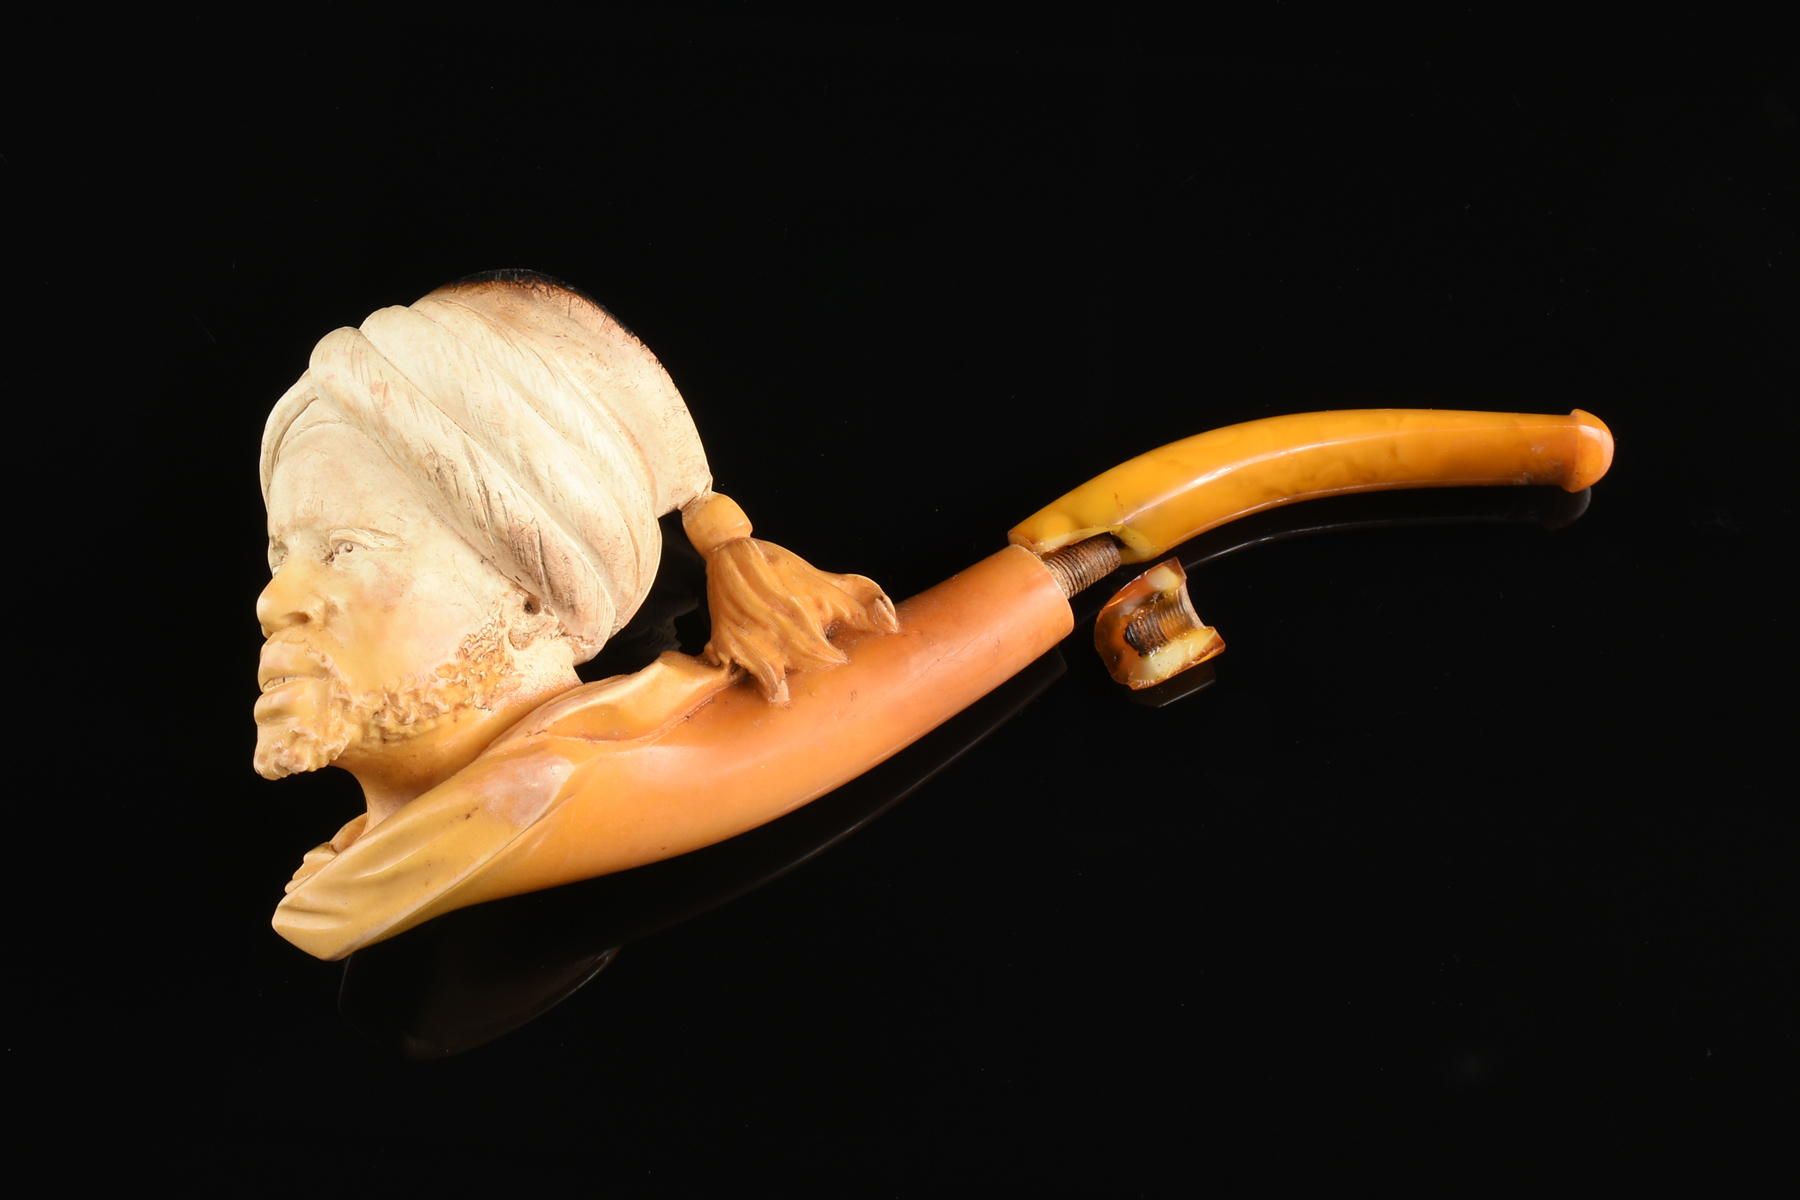 A GROUP OF THREE MEERSCHAUM TOBACCO PIPES, LATE 19TH/EARLY 20TH CENTURY, carved in the form of a - Image 7 of 9